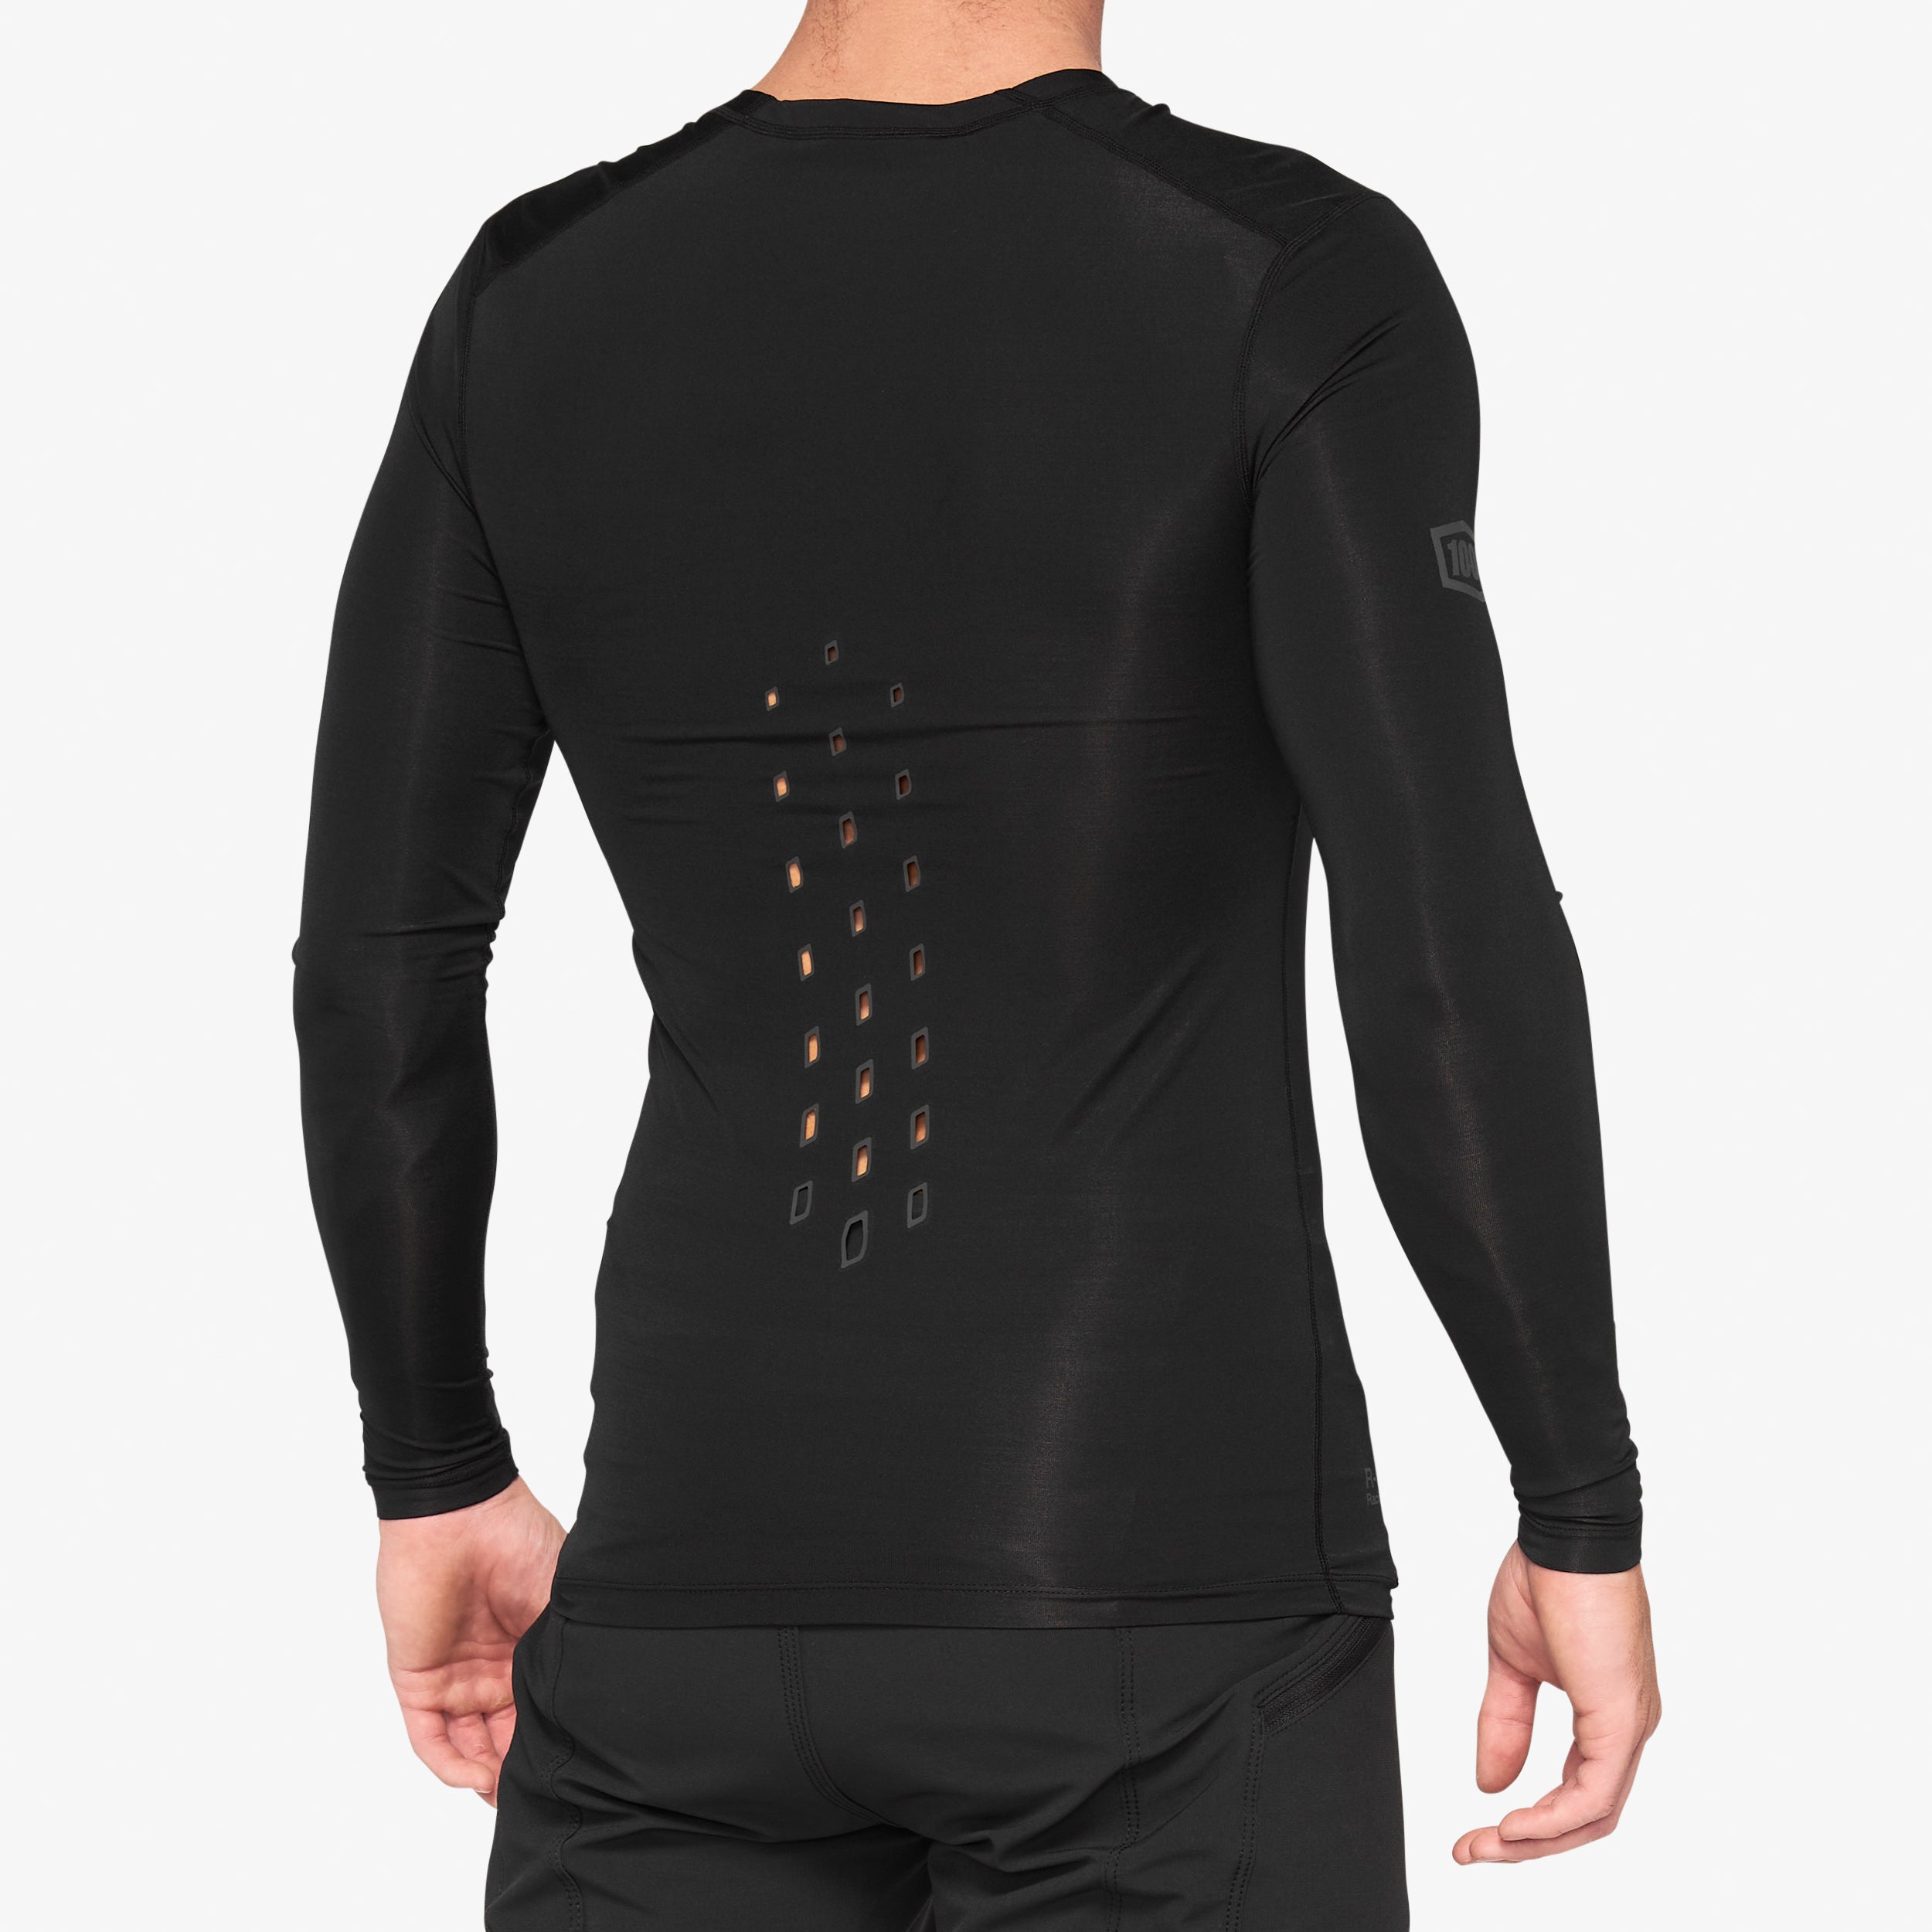 R-CORE Concept Long Sleeve Jersey Black - Secondary